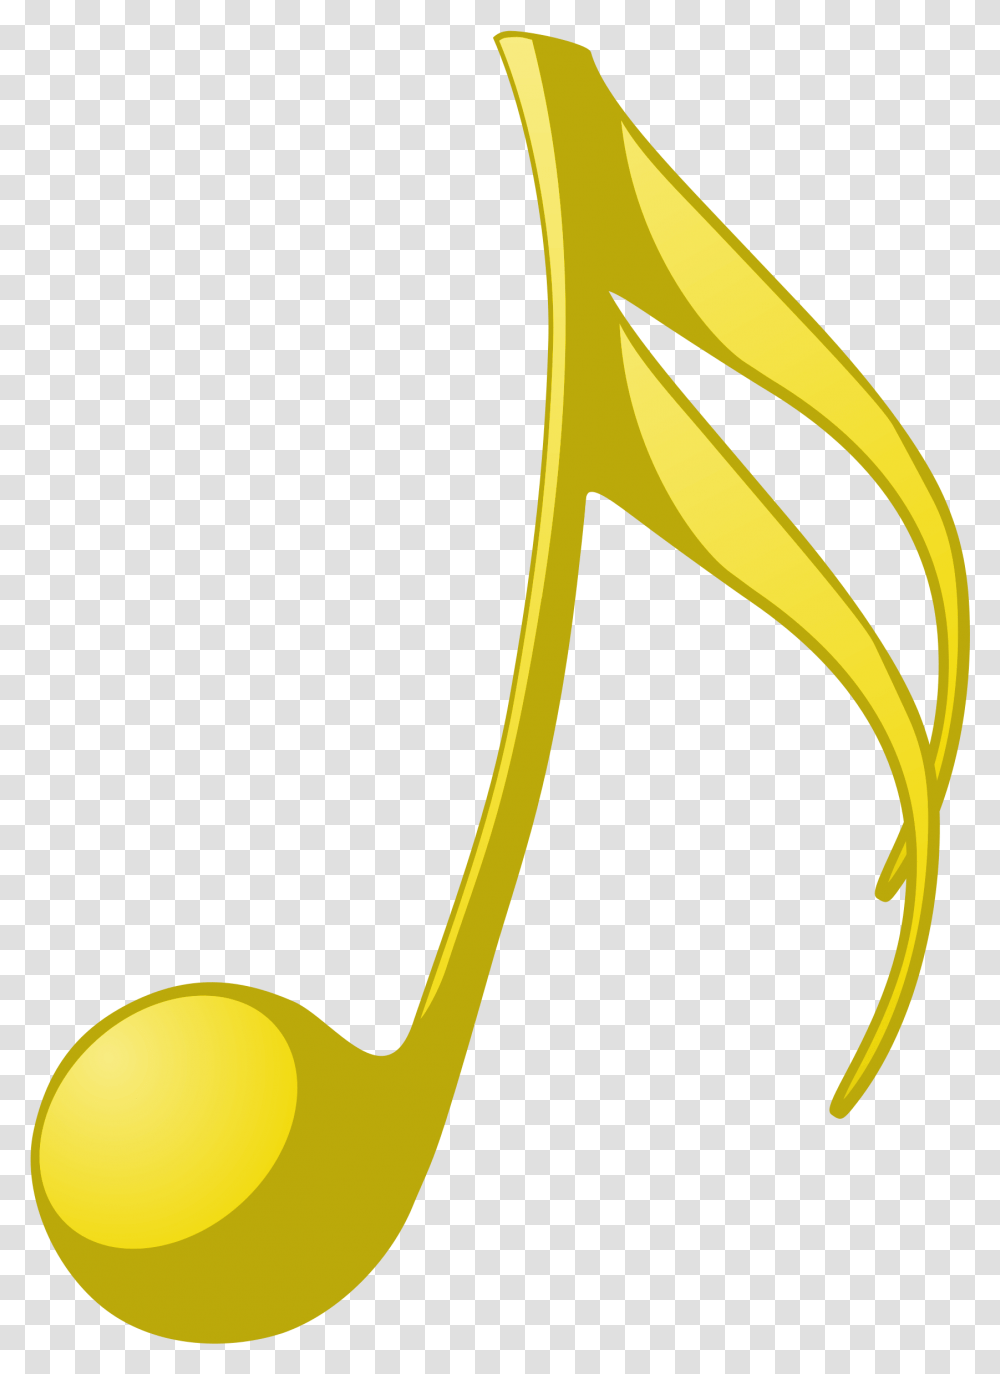 Download Music Note Image With No Background Pngkeycom Yellow Music Note, Plant, Hip Transparent Png